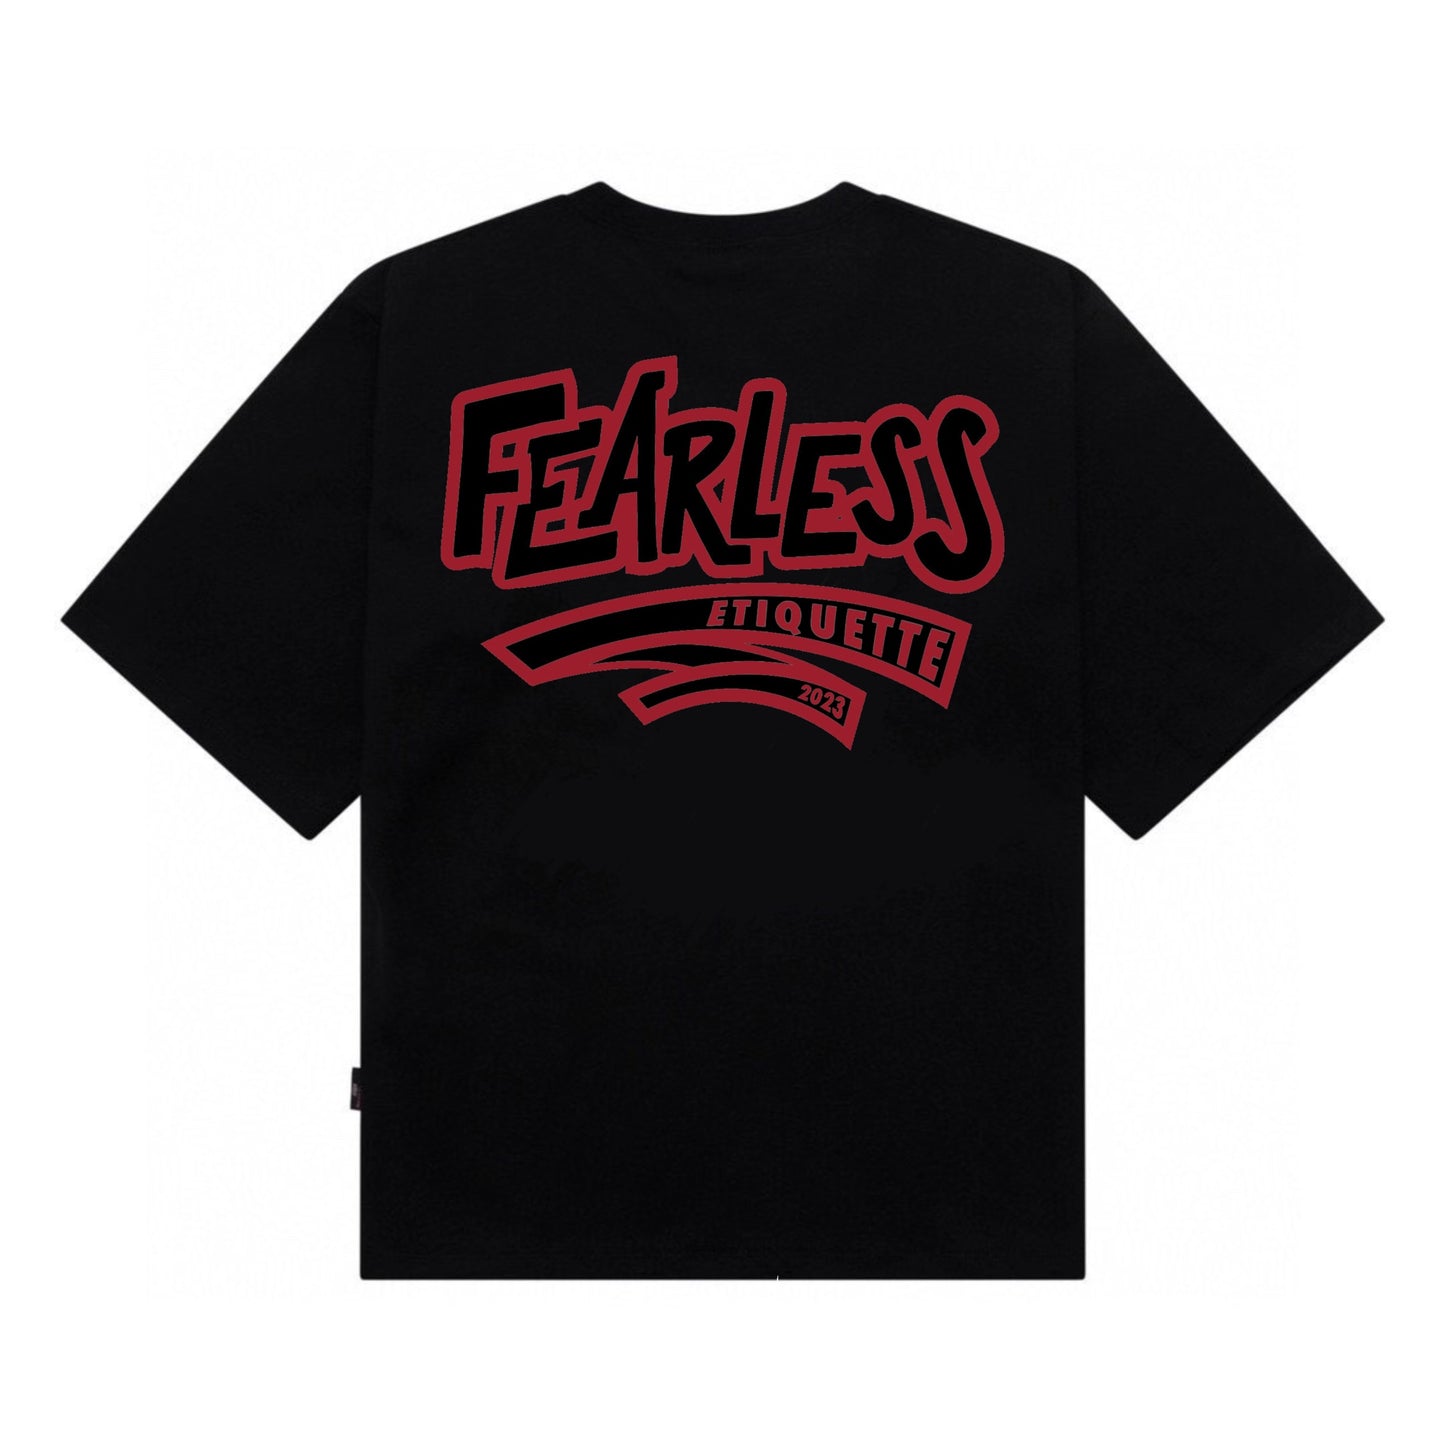 [étiquette d'amour] Fearless UFO Skull Teddy Premium Oversize Tee